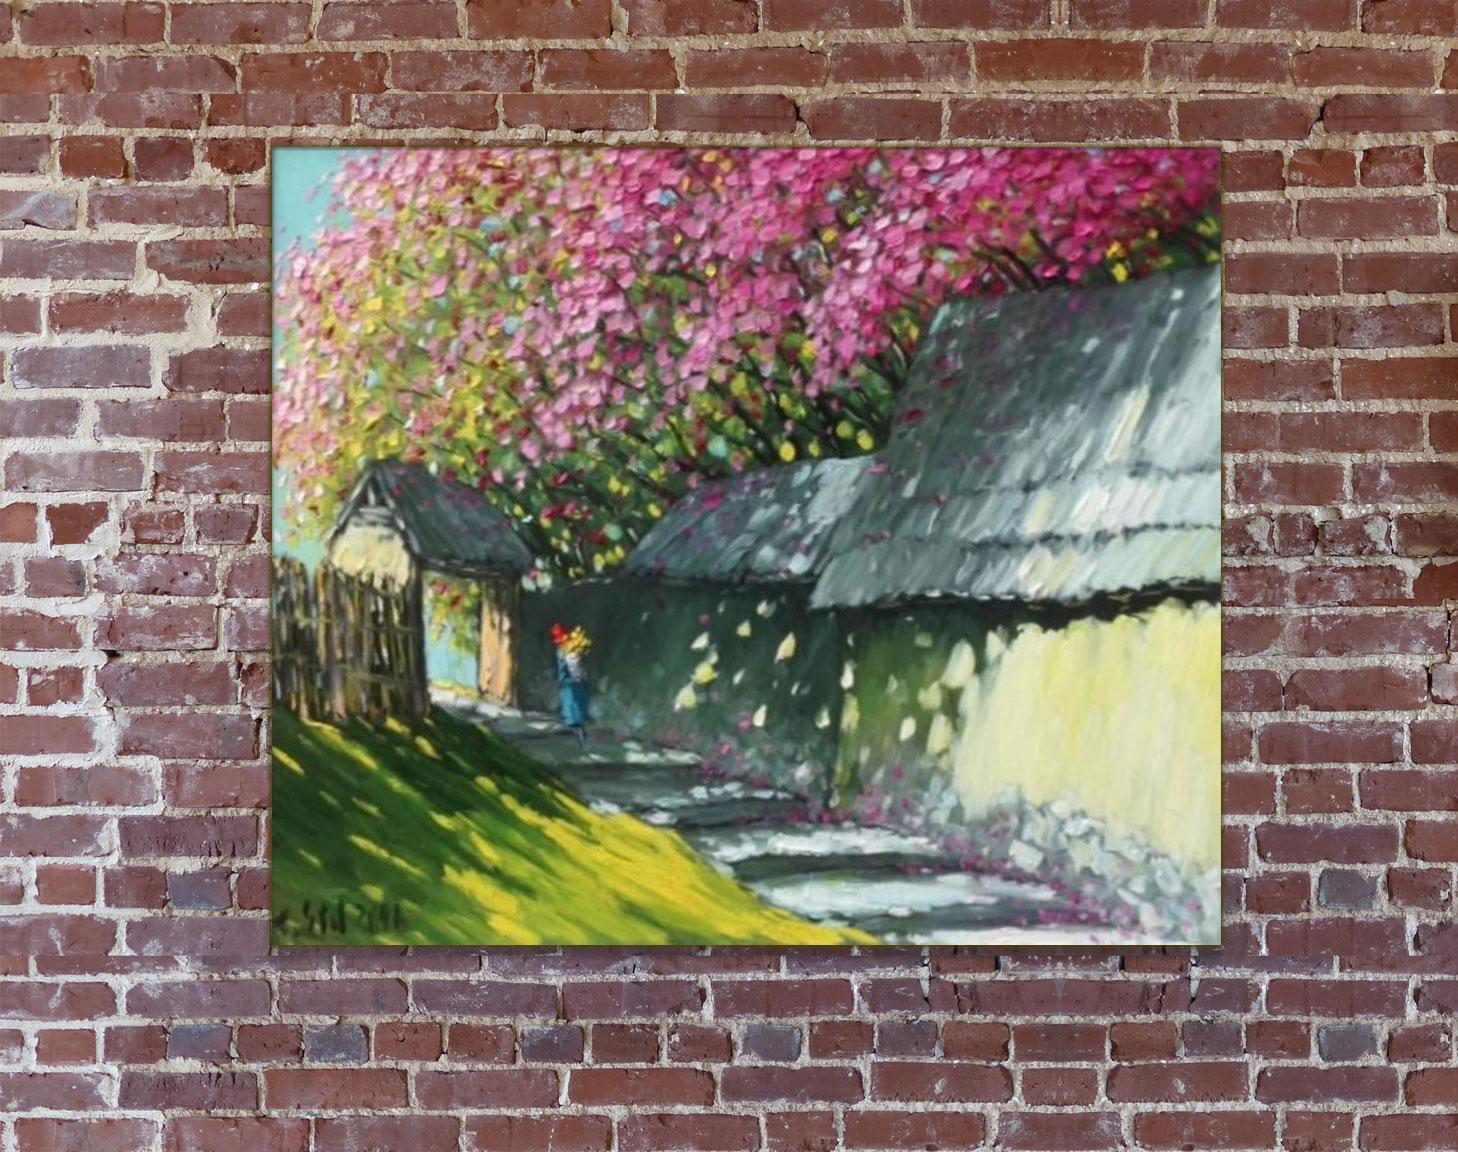 ‘Peaceful Summer’ is a large framed Impressionist oil on canvas landscape painting created by Vietnamese artist Le Thanh Son in 2016. Featuring a lovely palette mostly made of pink, grey, yellow, green and blue, the painting depicts a serene